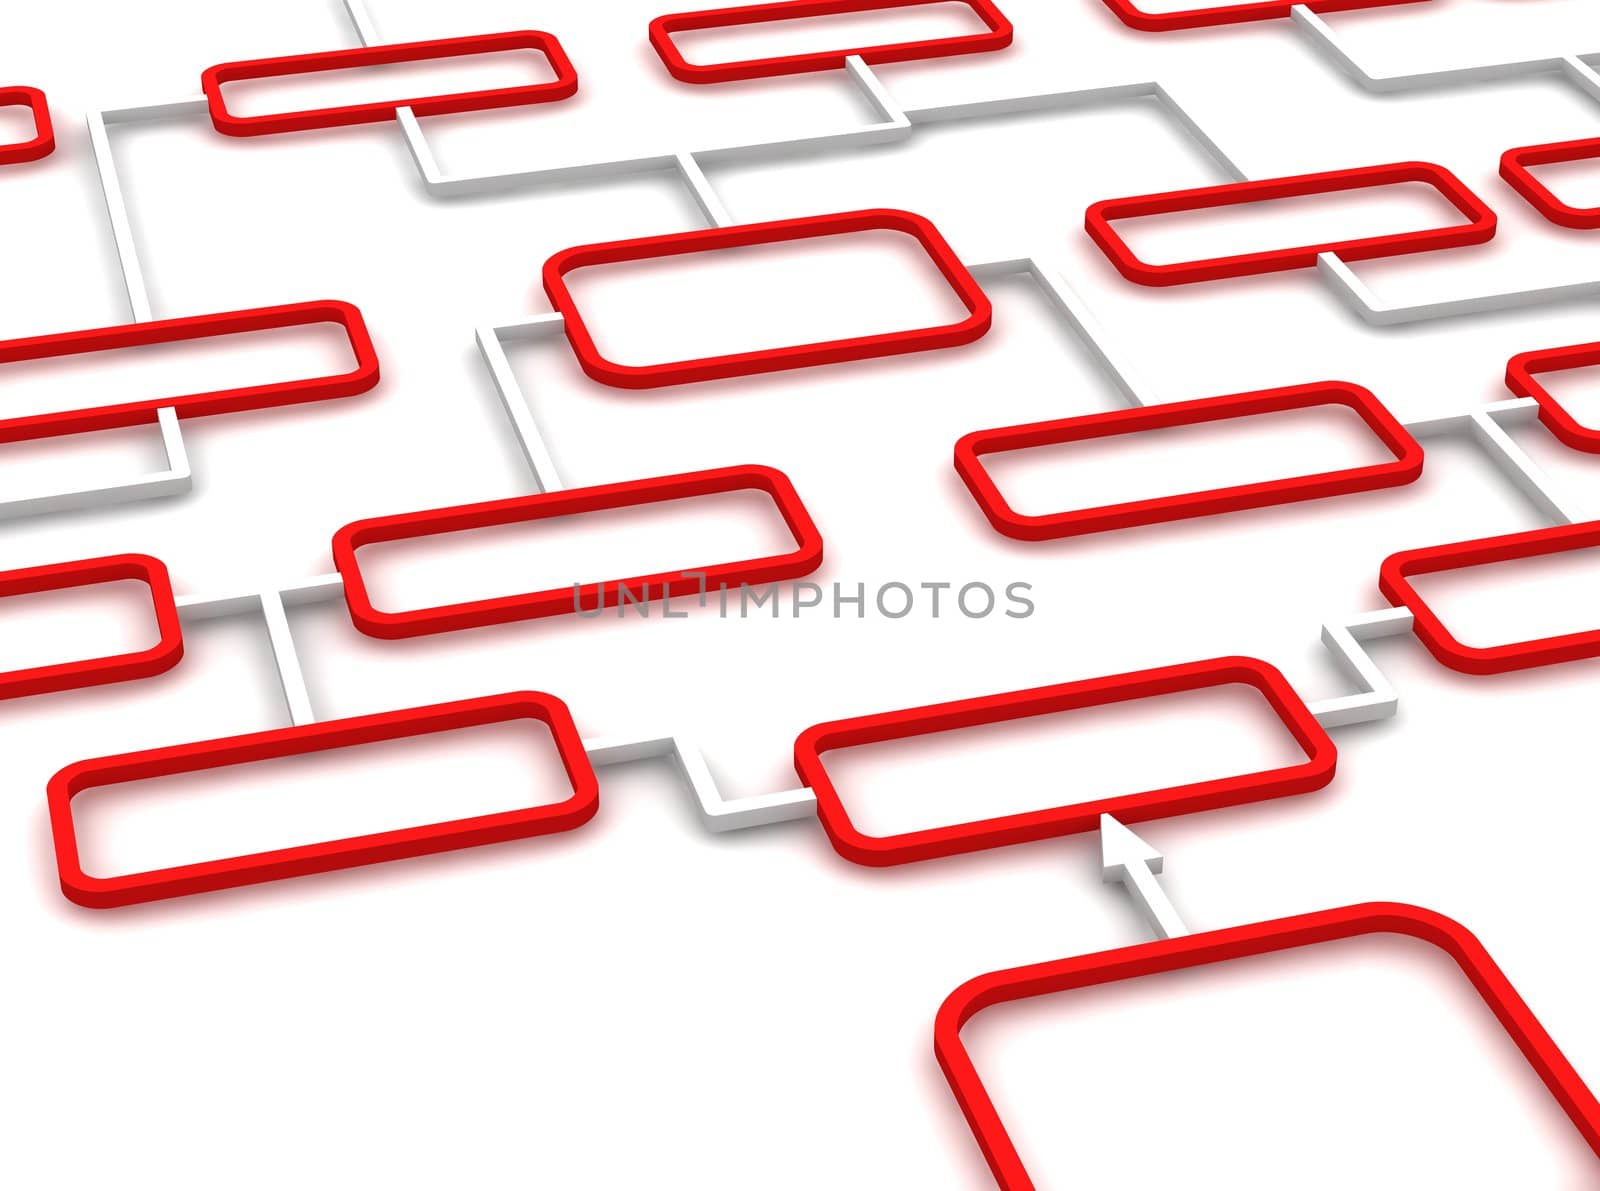 Red and white schematic diagram. 3d rendered illustration.